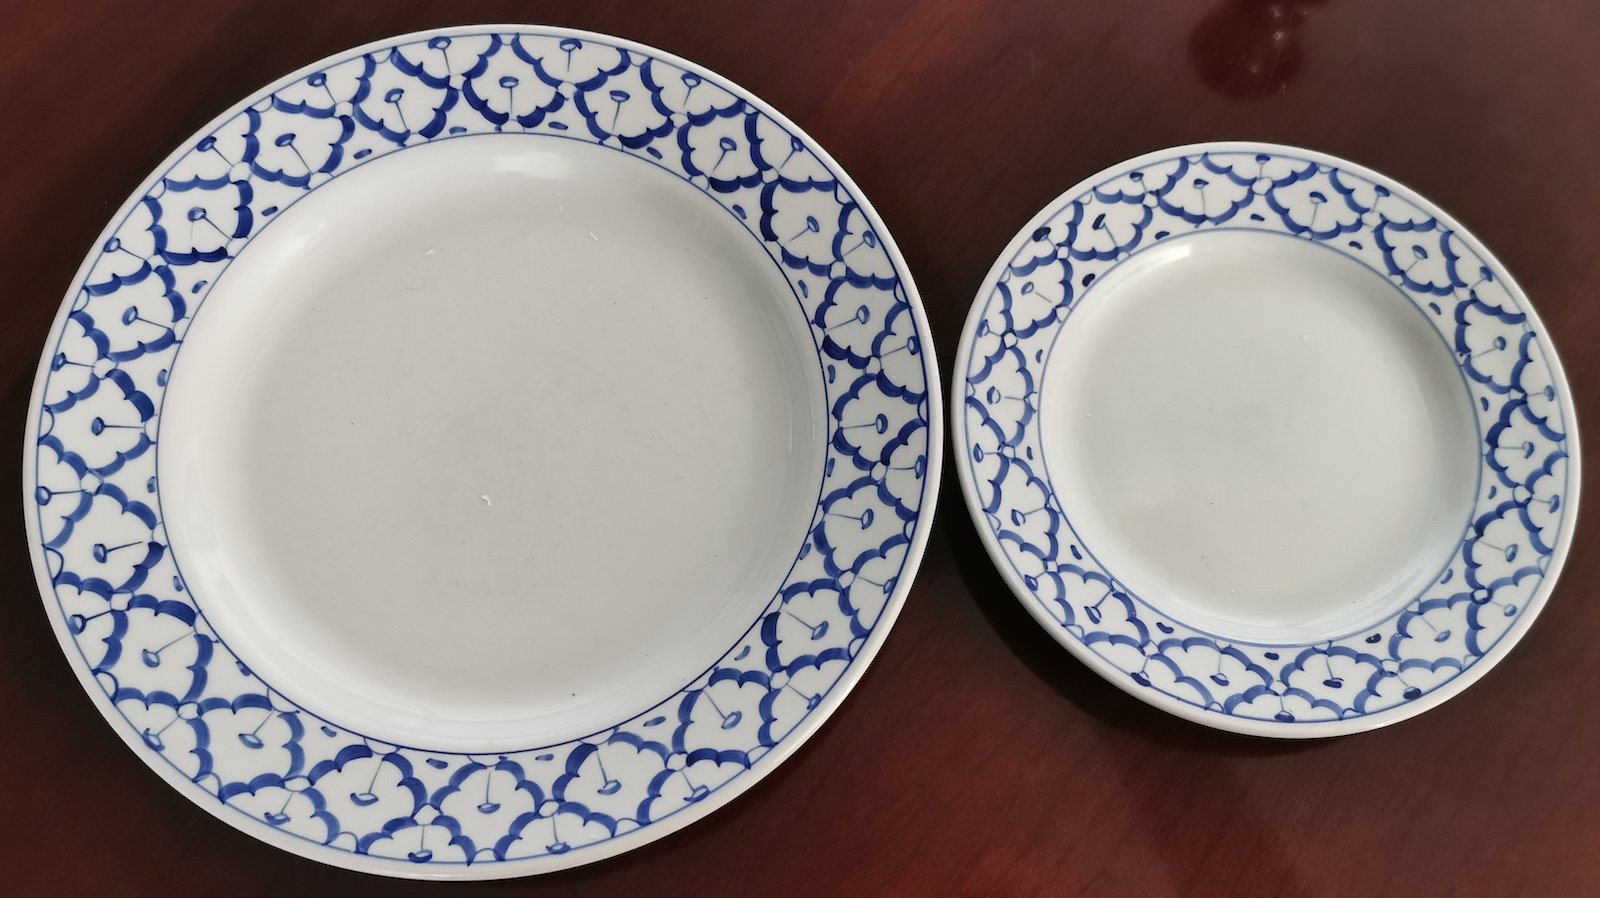  GG8670 Set 12 Blue and white restaurant quality dinner plates (26.5cm) and side plates (19cm), $50 set 6, Retired Antique dealer, formerly Grace Galleries, selling off his personal collection. Online and by appointment. Phone 0408 109 427 grace@grac